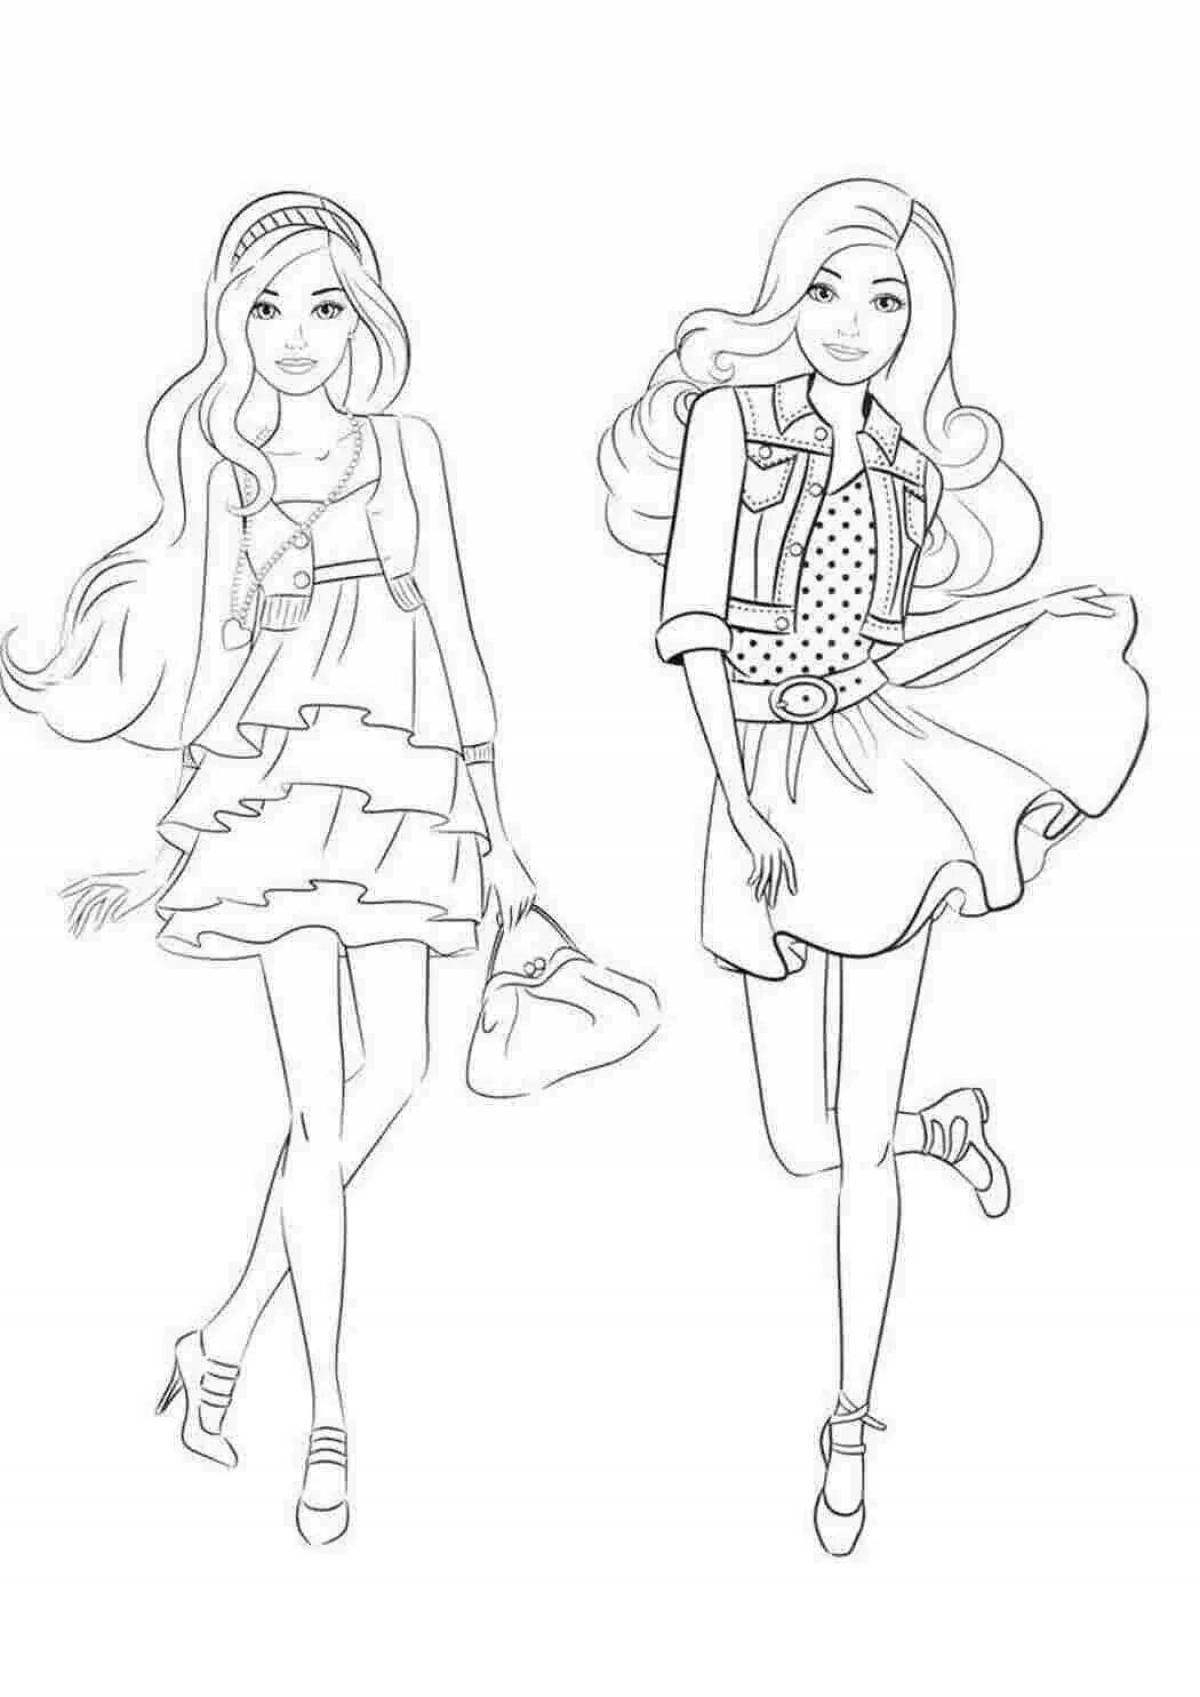 Coloring pages stylish girls - adorable